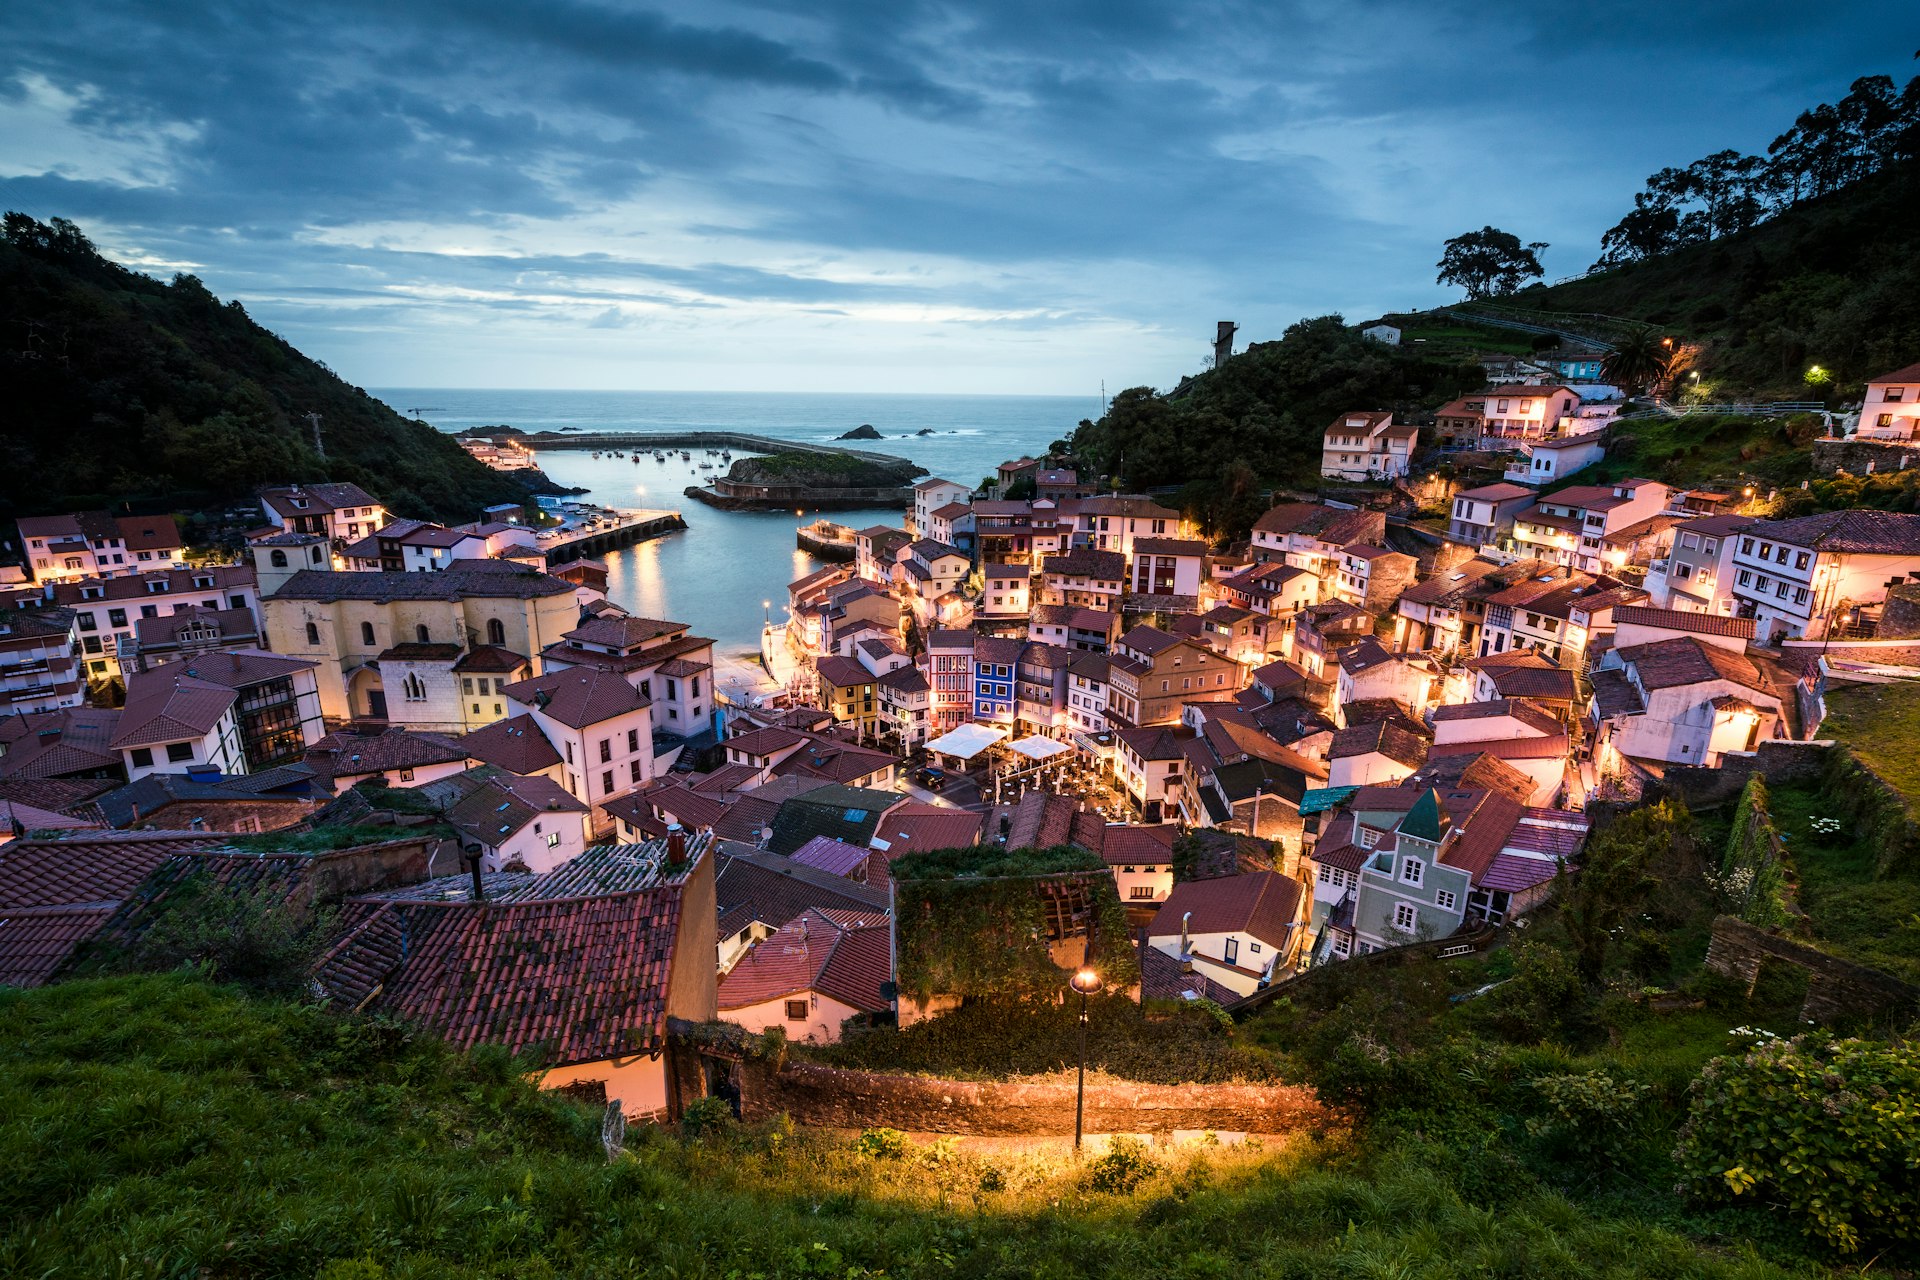 View from the top of the village at dusk, Cudillero, Asturias, Spain